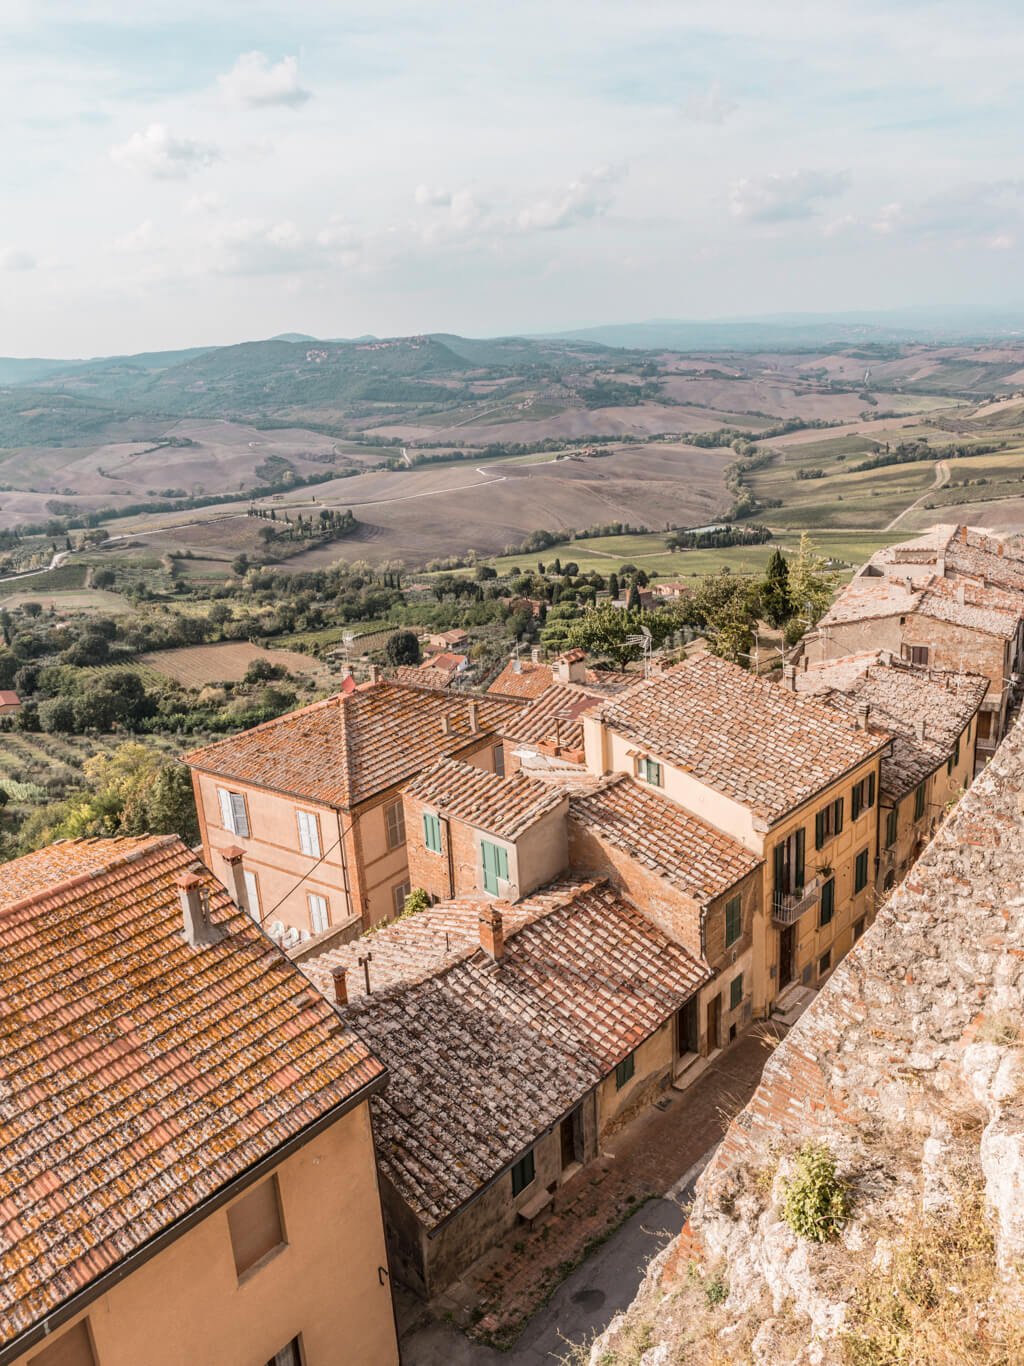 Montepulciano || A Guide For Planning A Trip To Tuscany, Italy - Things to do, including food & restaurants tips, wineries, and road trip tips